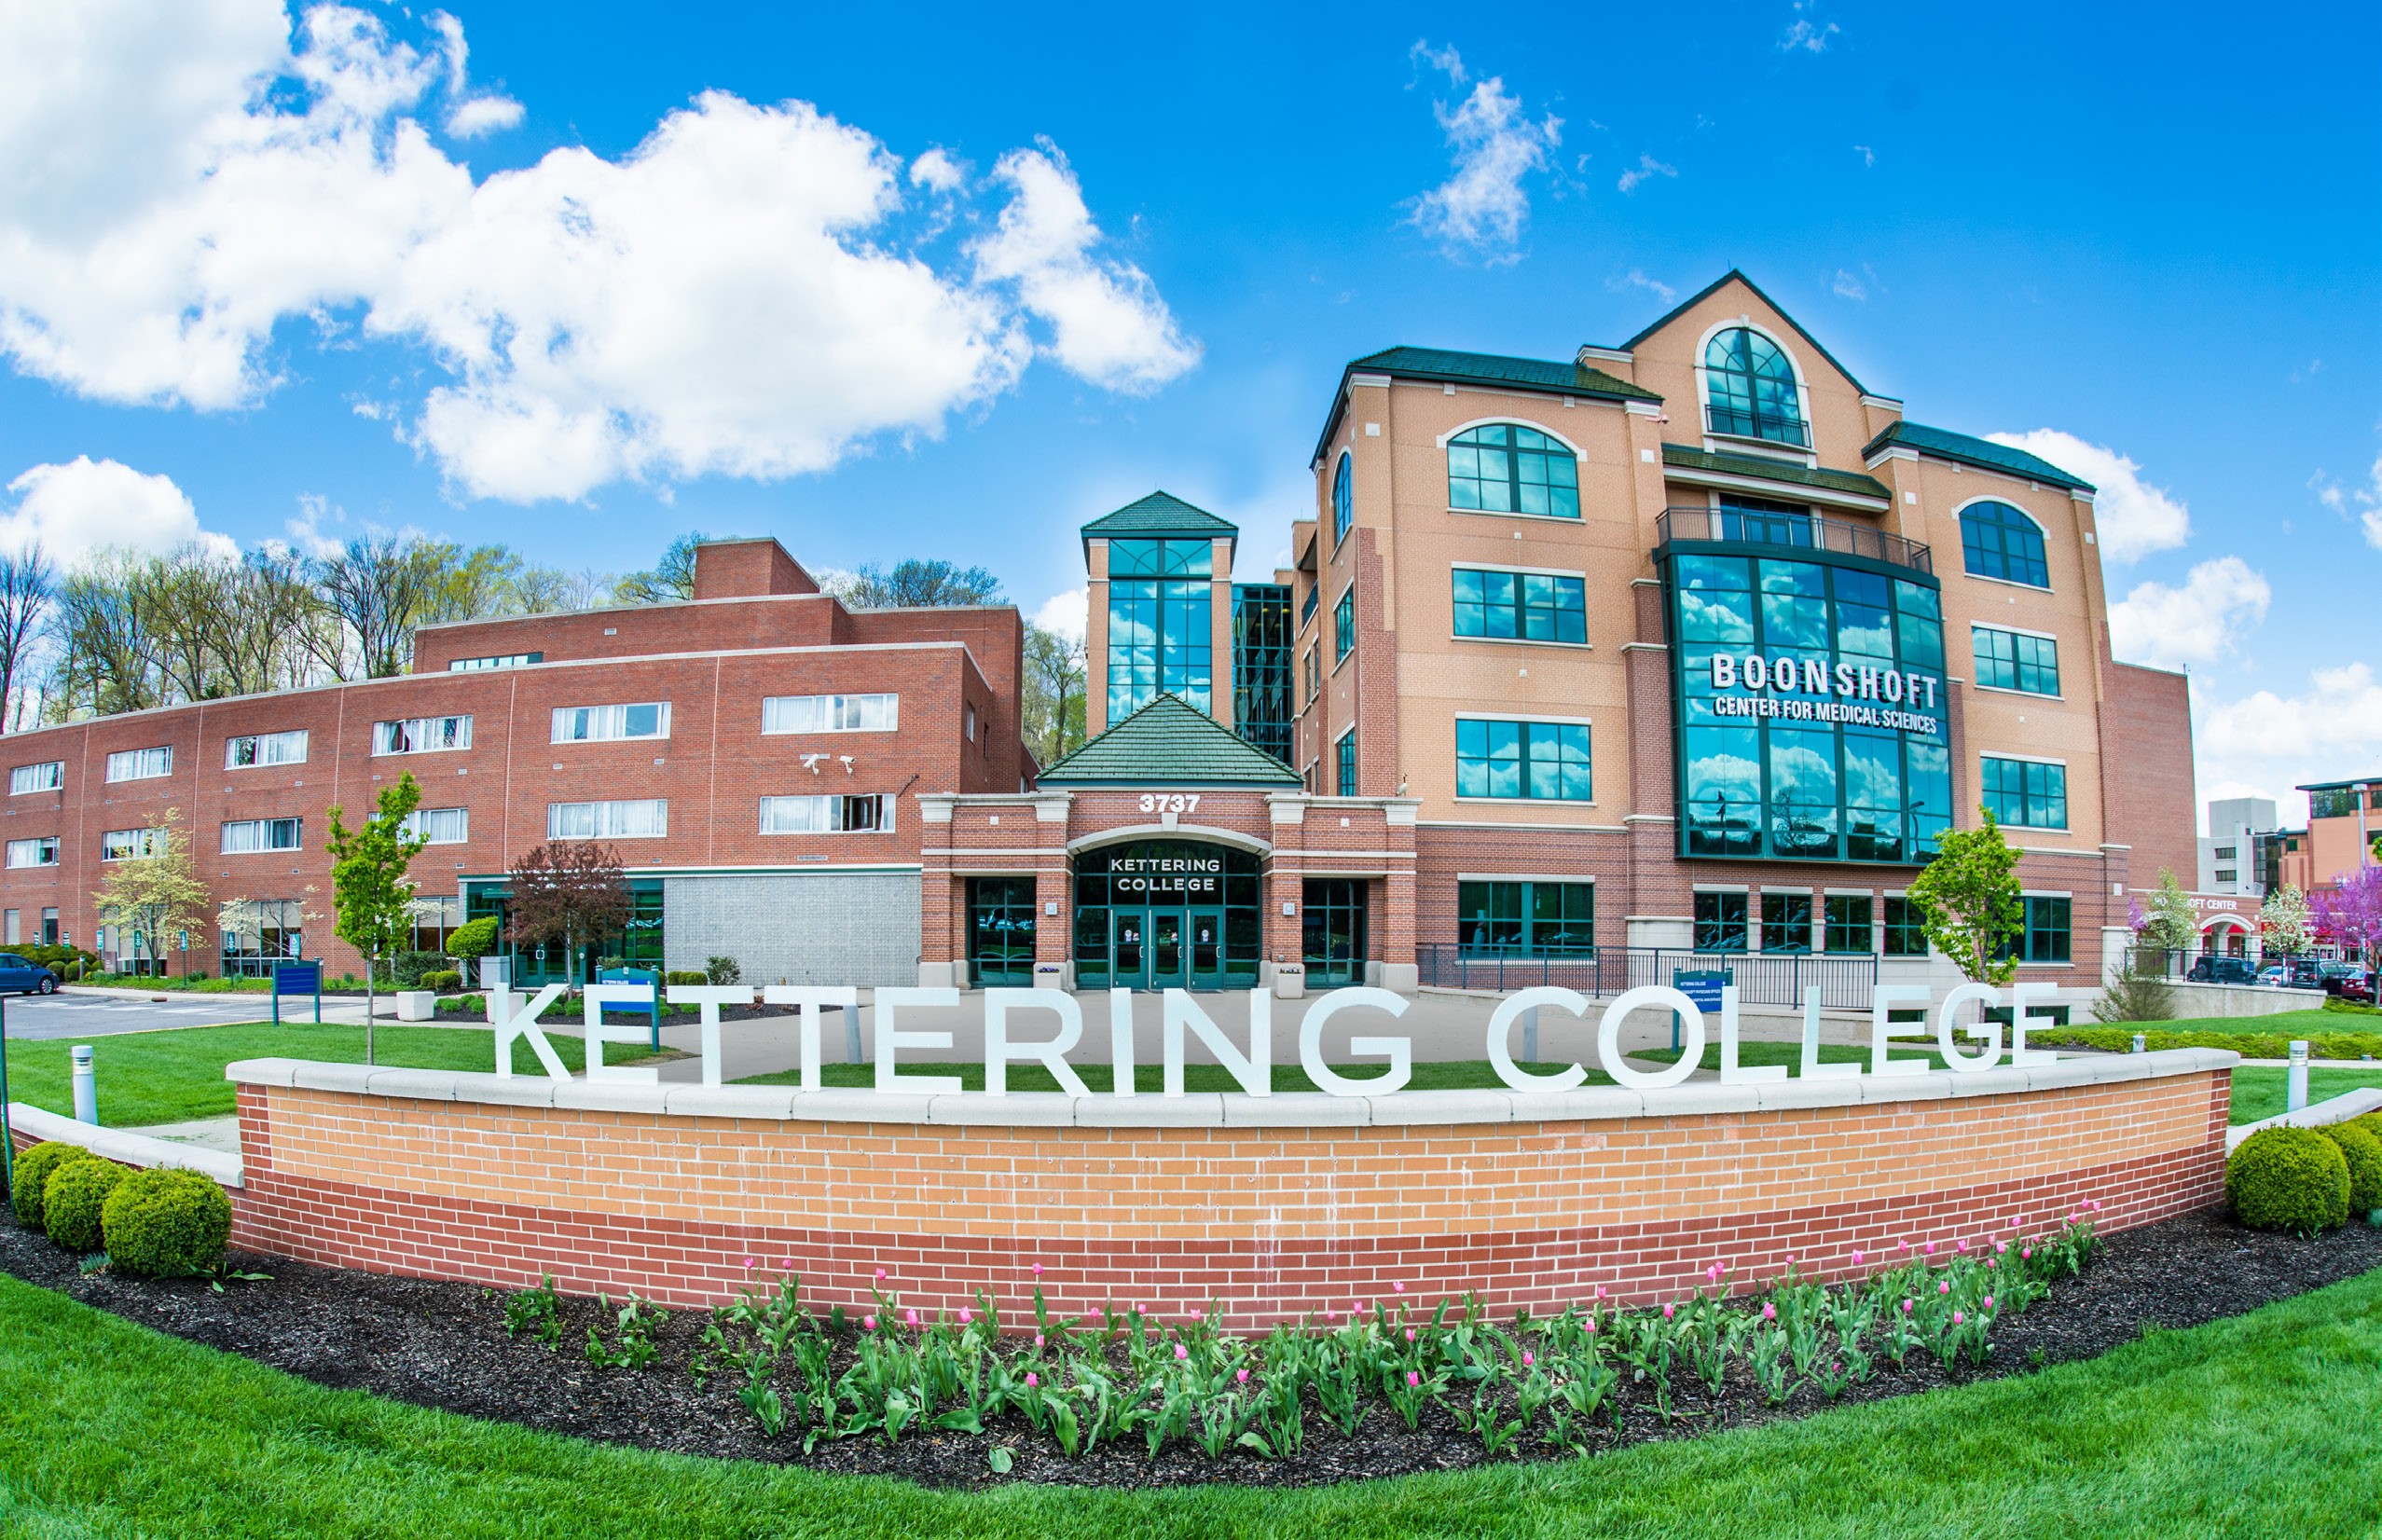 kettering college